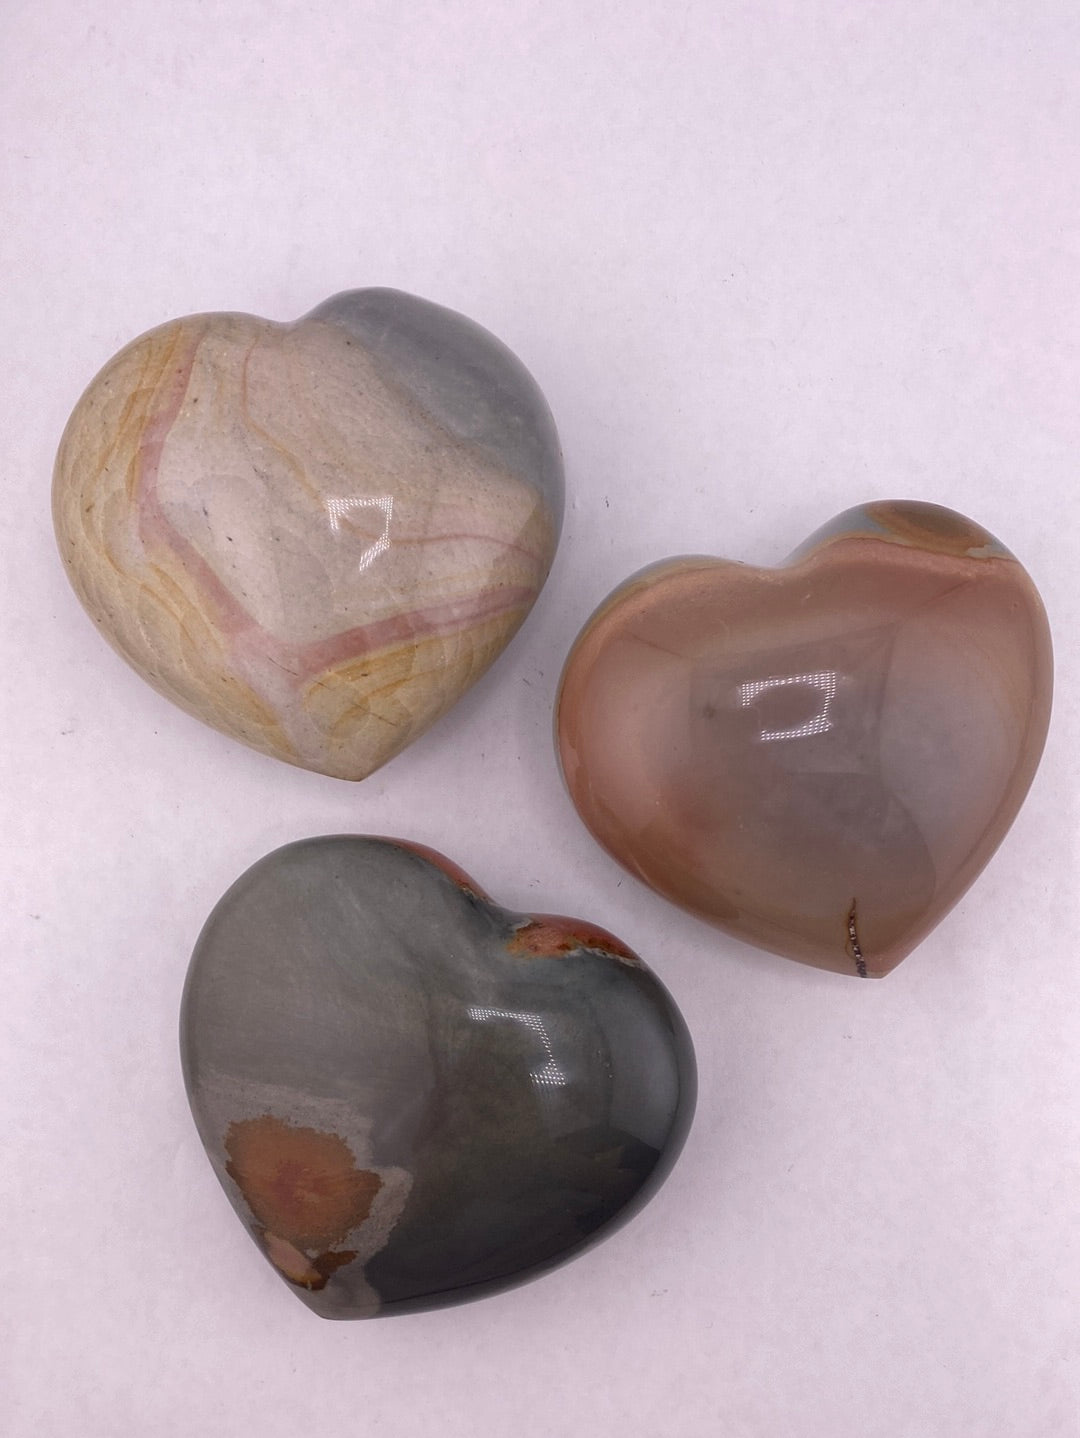 Polychrome jasper heart available at wholesale and retail prices, only at our crystal shop in San Diego!